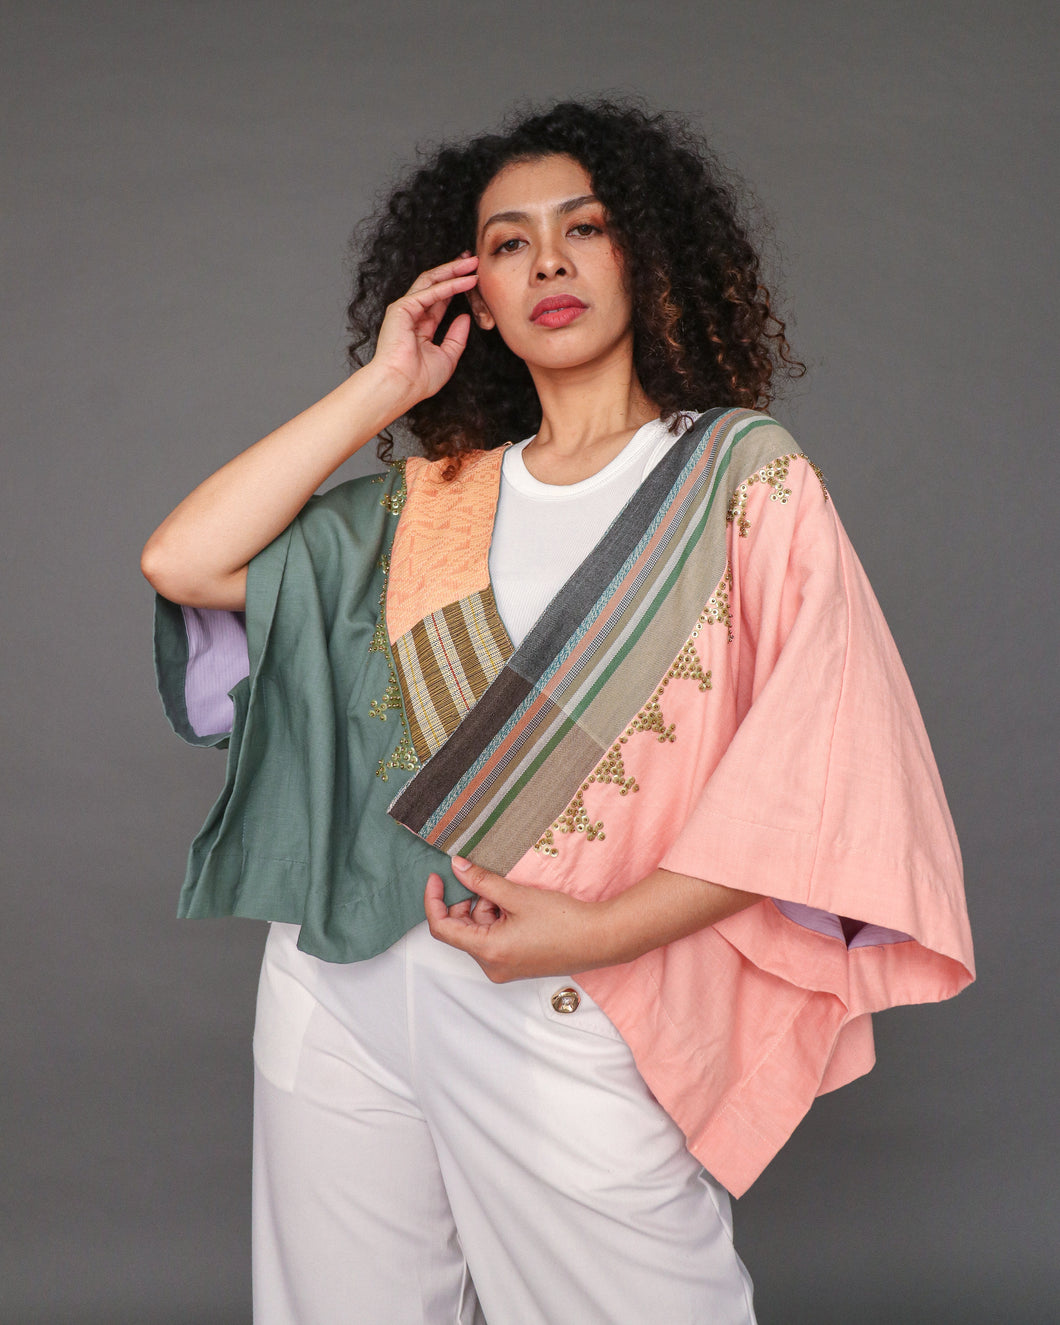 Heritage Poncho in Soft Linen with Hand Embroidery and Lining in Yakan Peach and Rare Negros Green